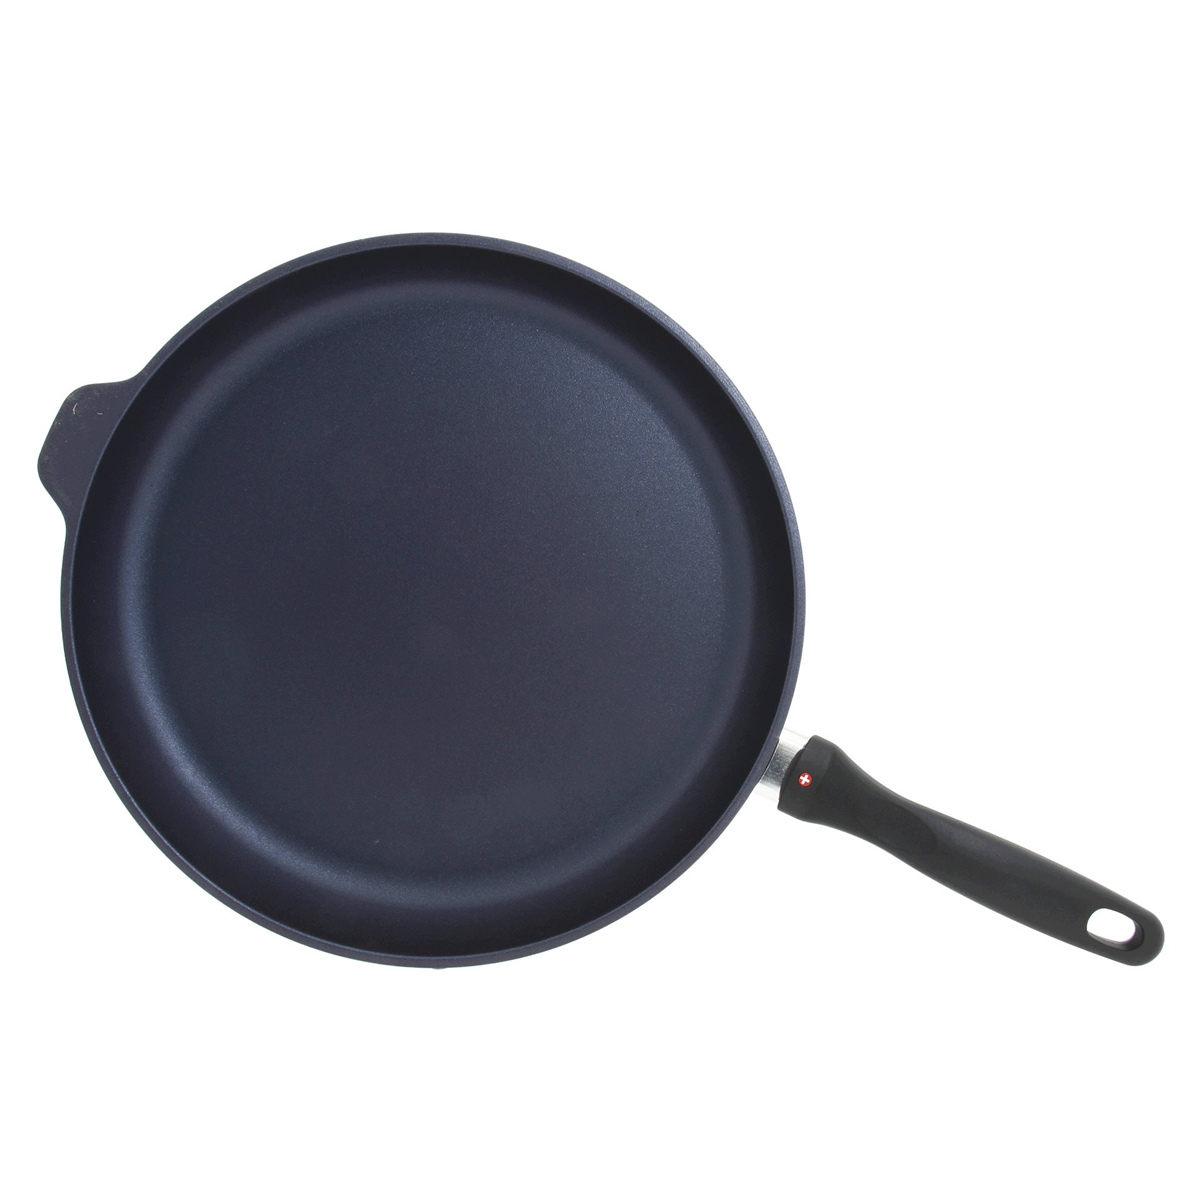 Frying Pan Pictures   Clipart Best